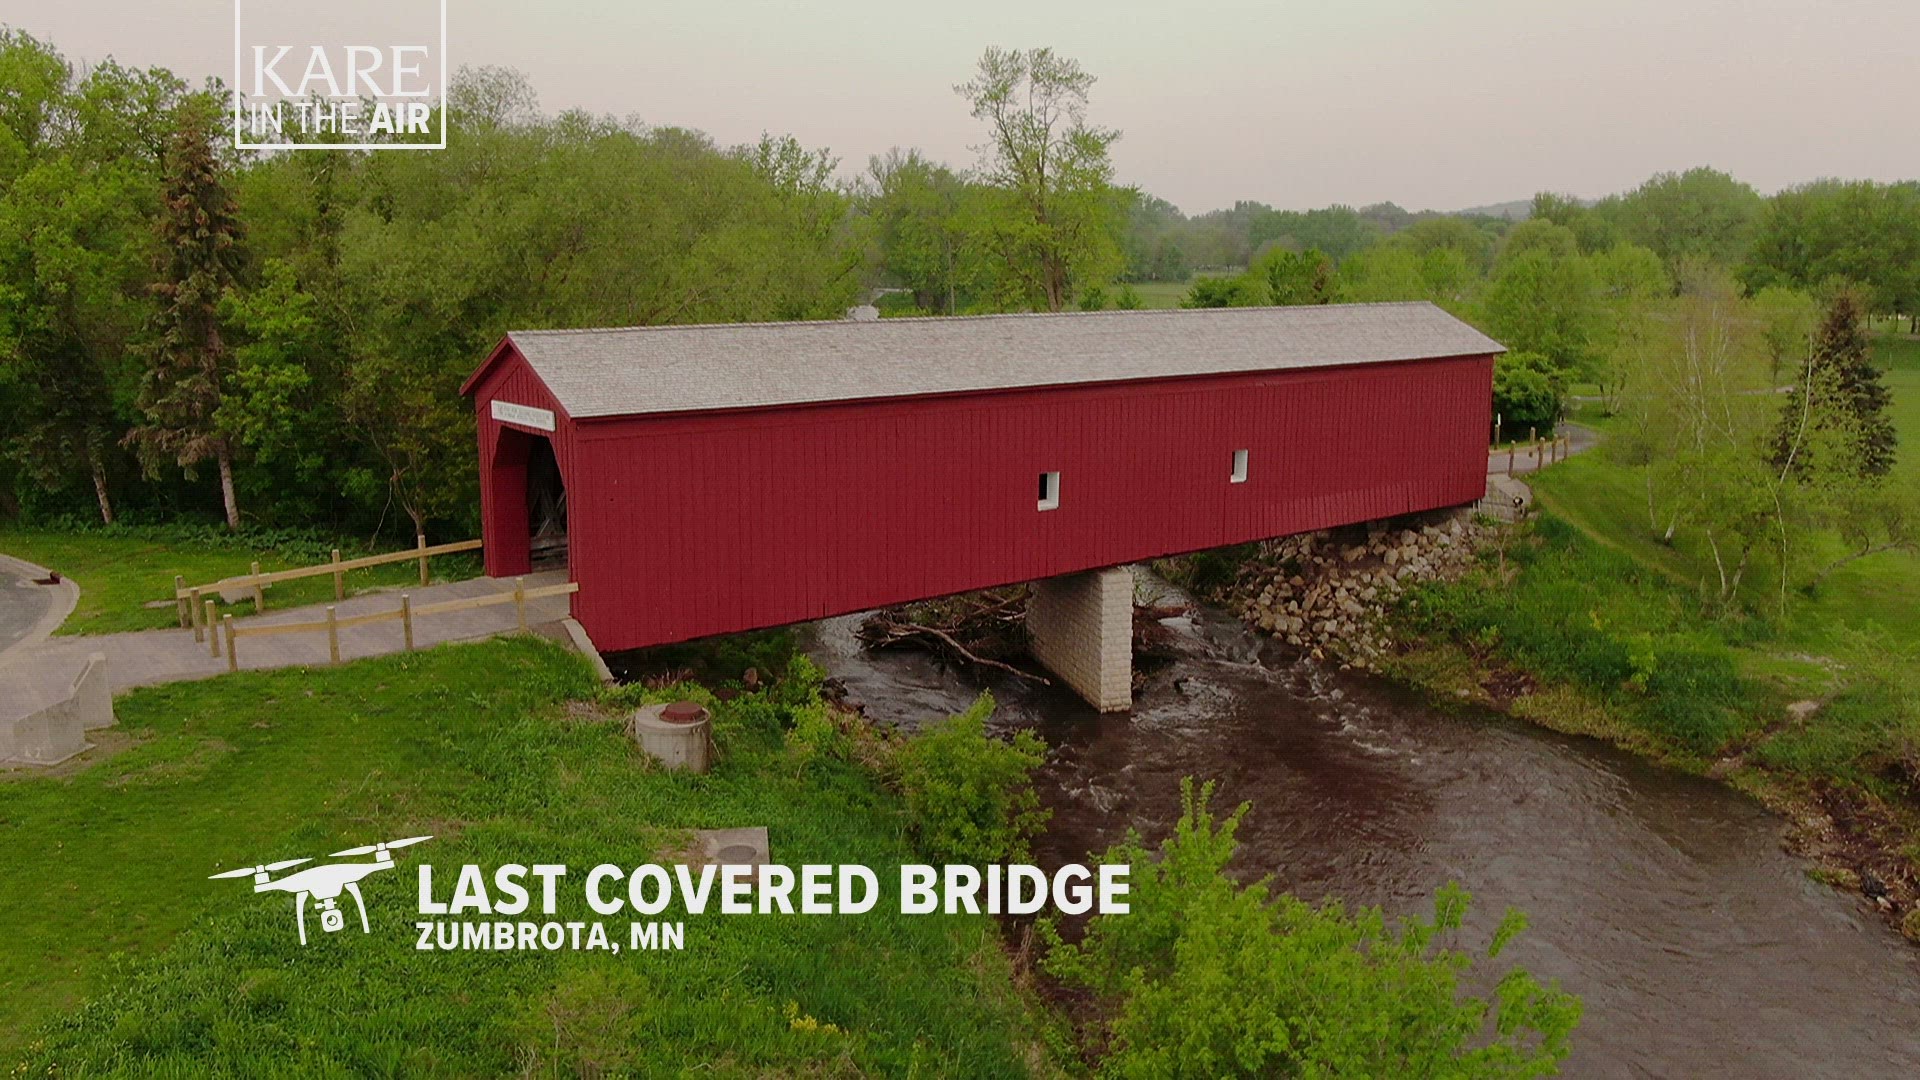 The historic structure, believed to be the last covered timber truss bridge in Minnesota, was built in 1869 and carried people and stagecoaches across the river.